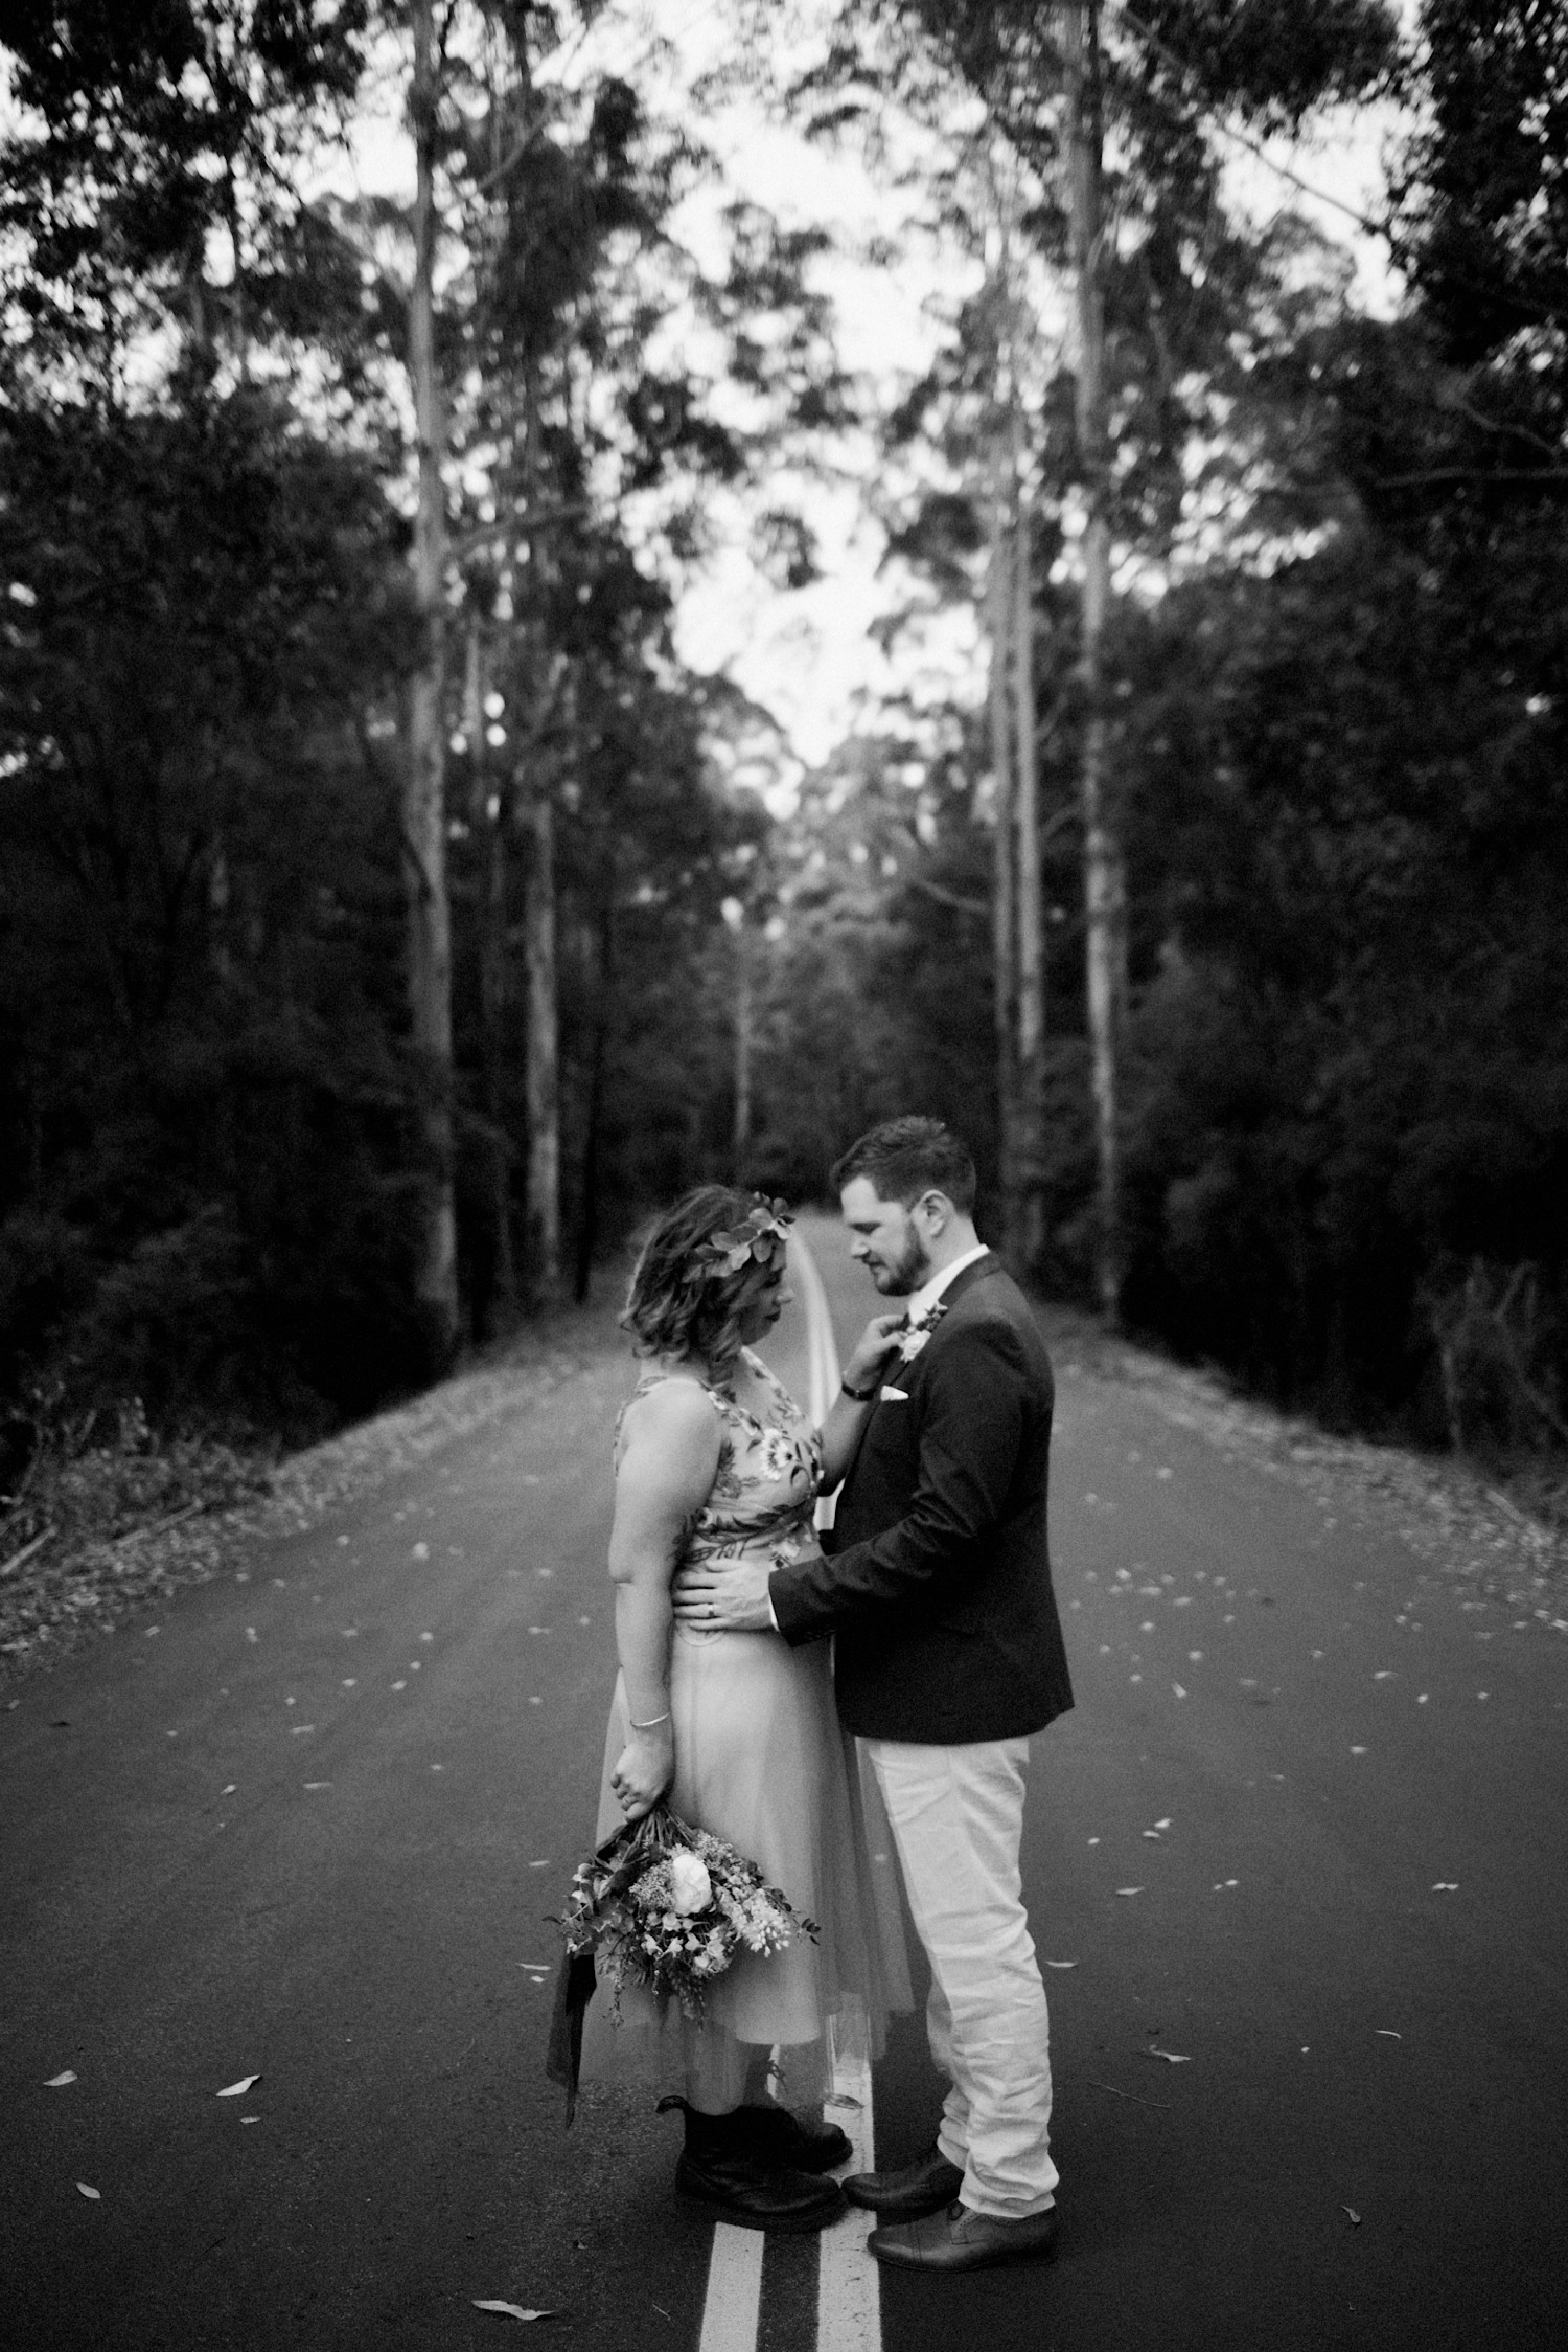 A black & white wedding portrait of the bride & groom on a country street surrounded by tall trees.